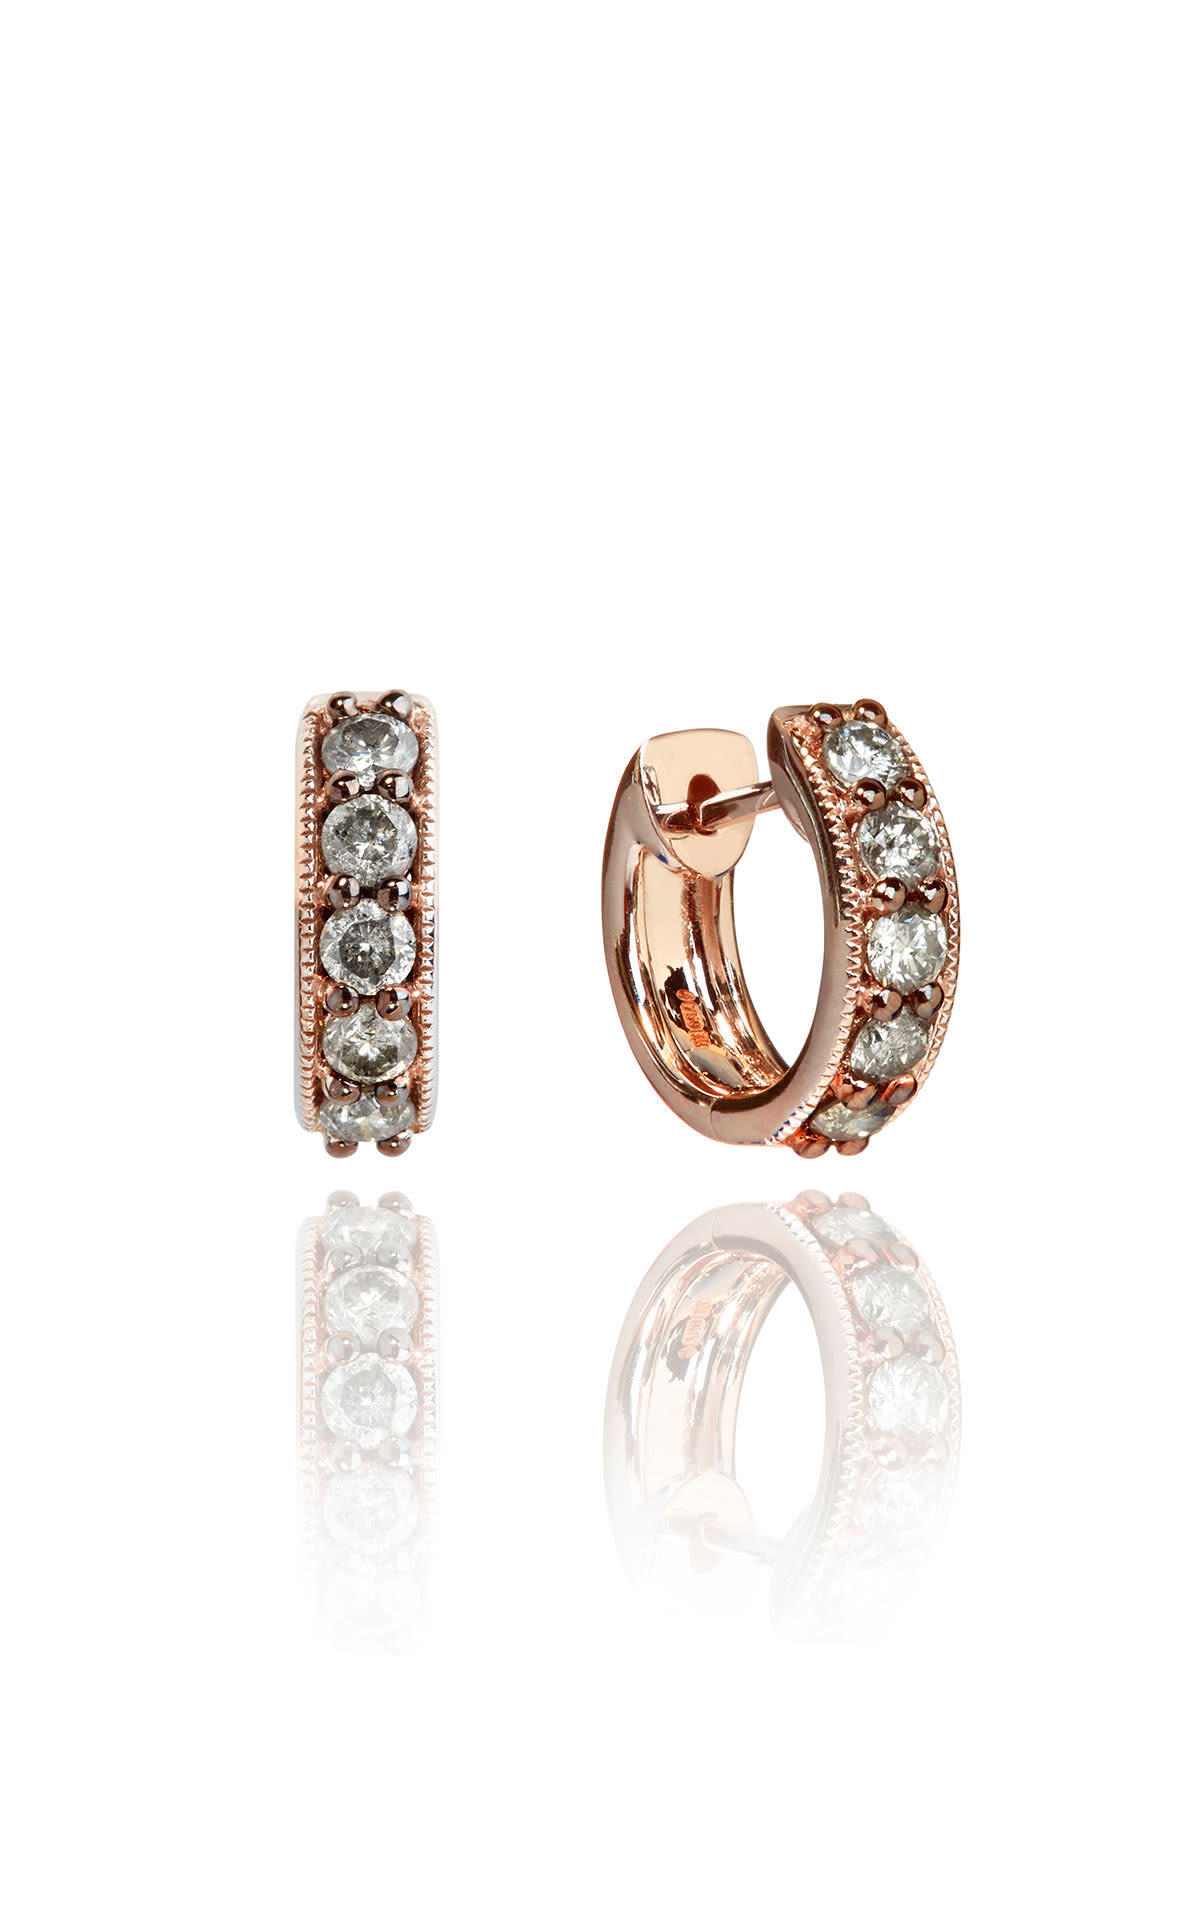 Dusty diamond rose gold earrings from Bicester Village